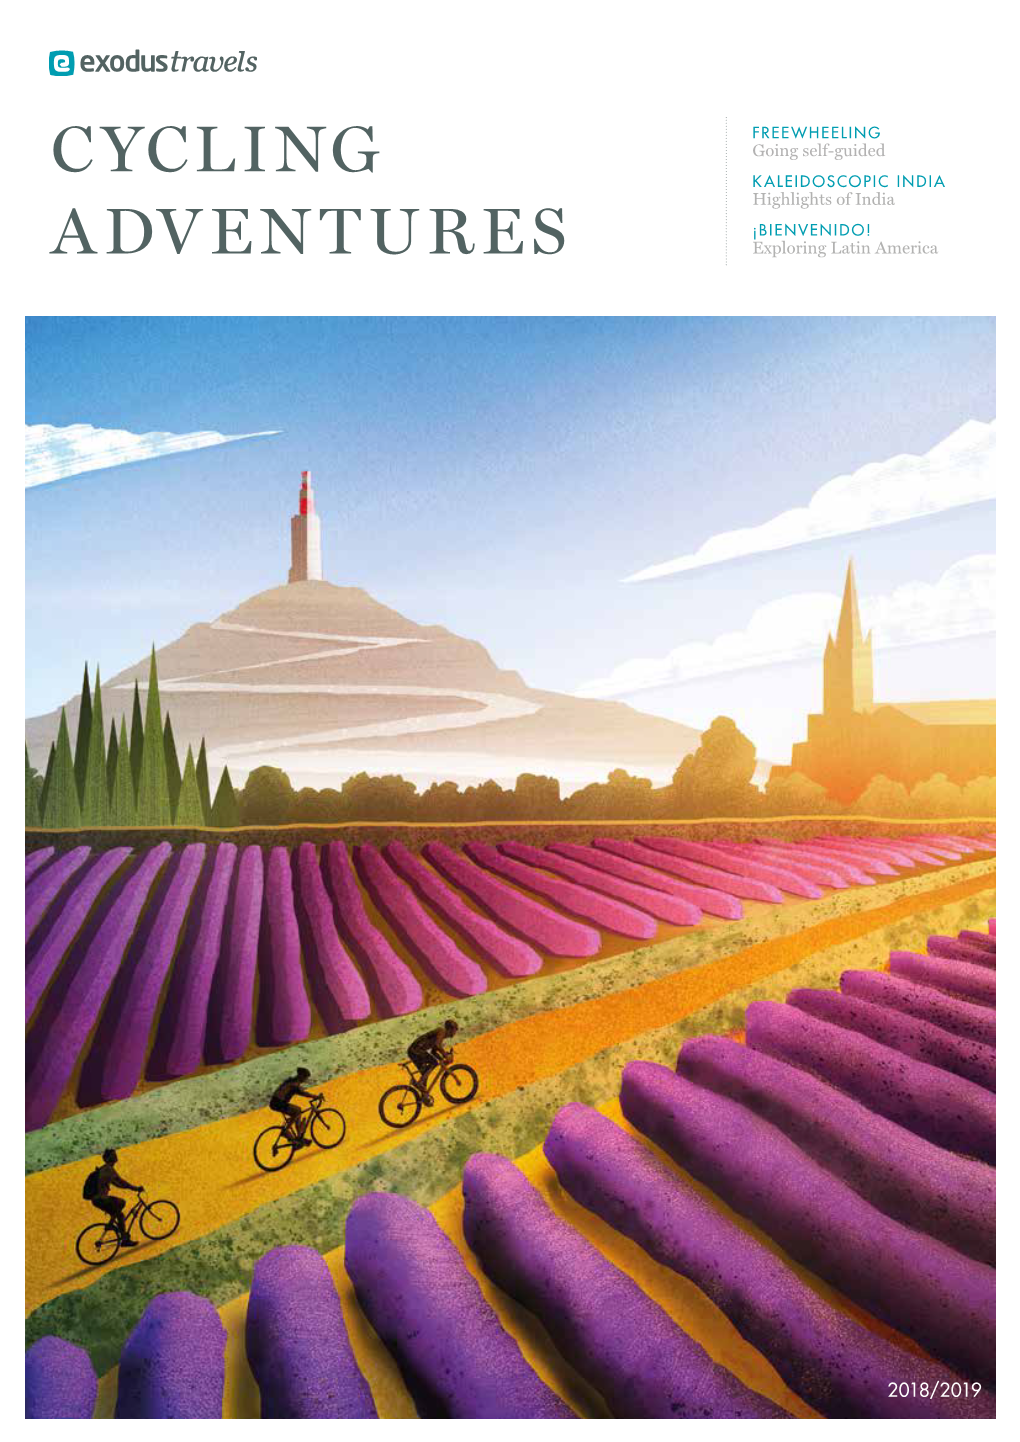 Cycling Adventures Brochure, Your Ticket to the Best Rides on the Planet